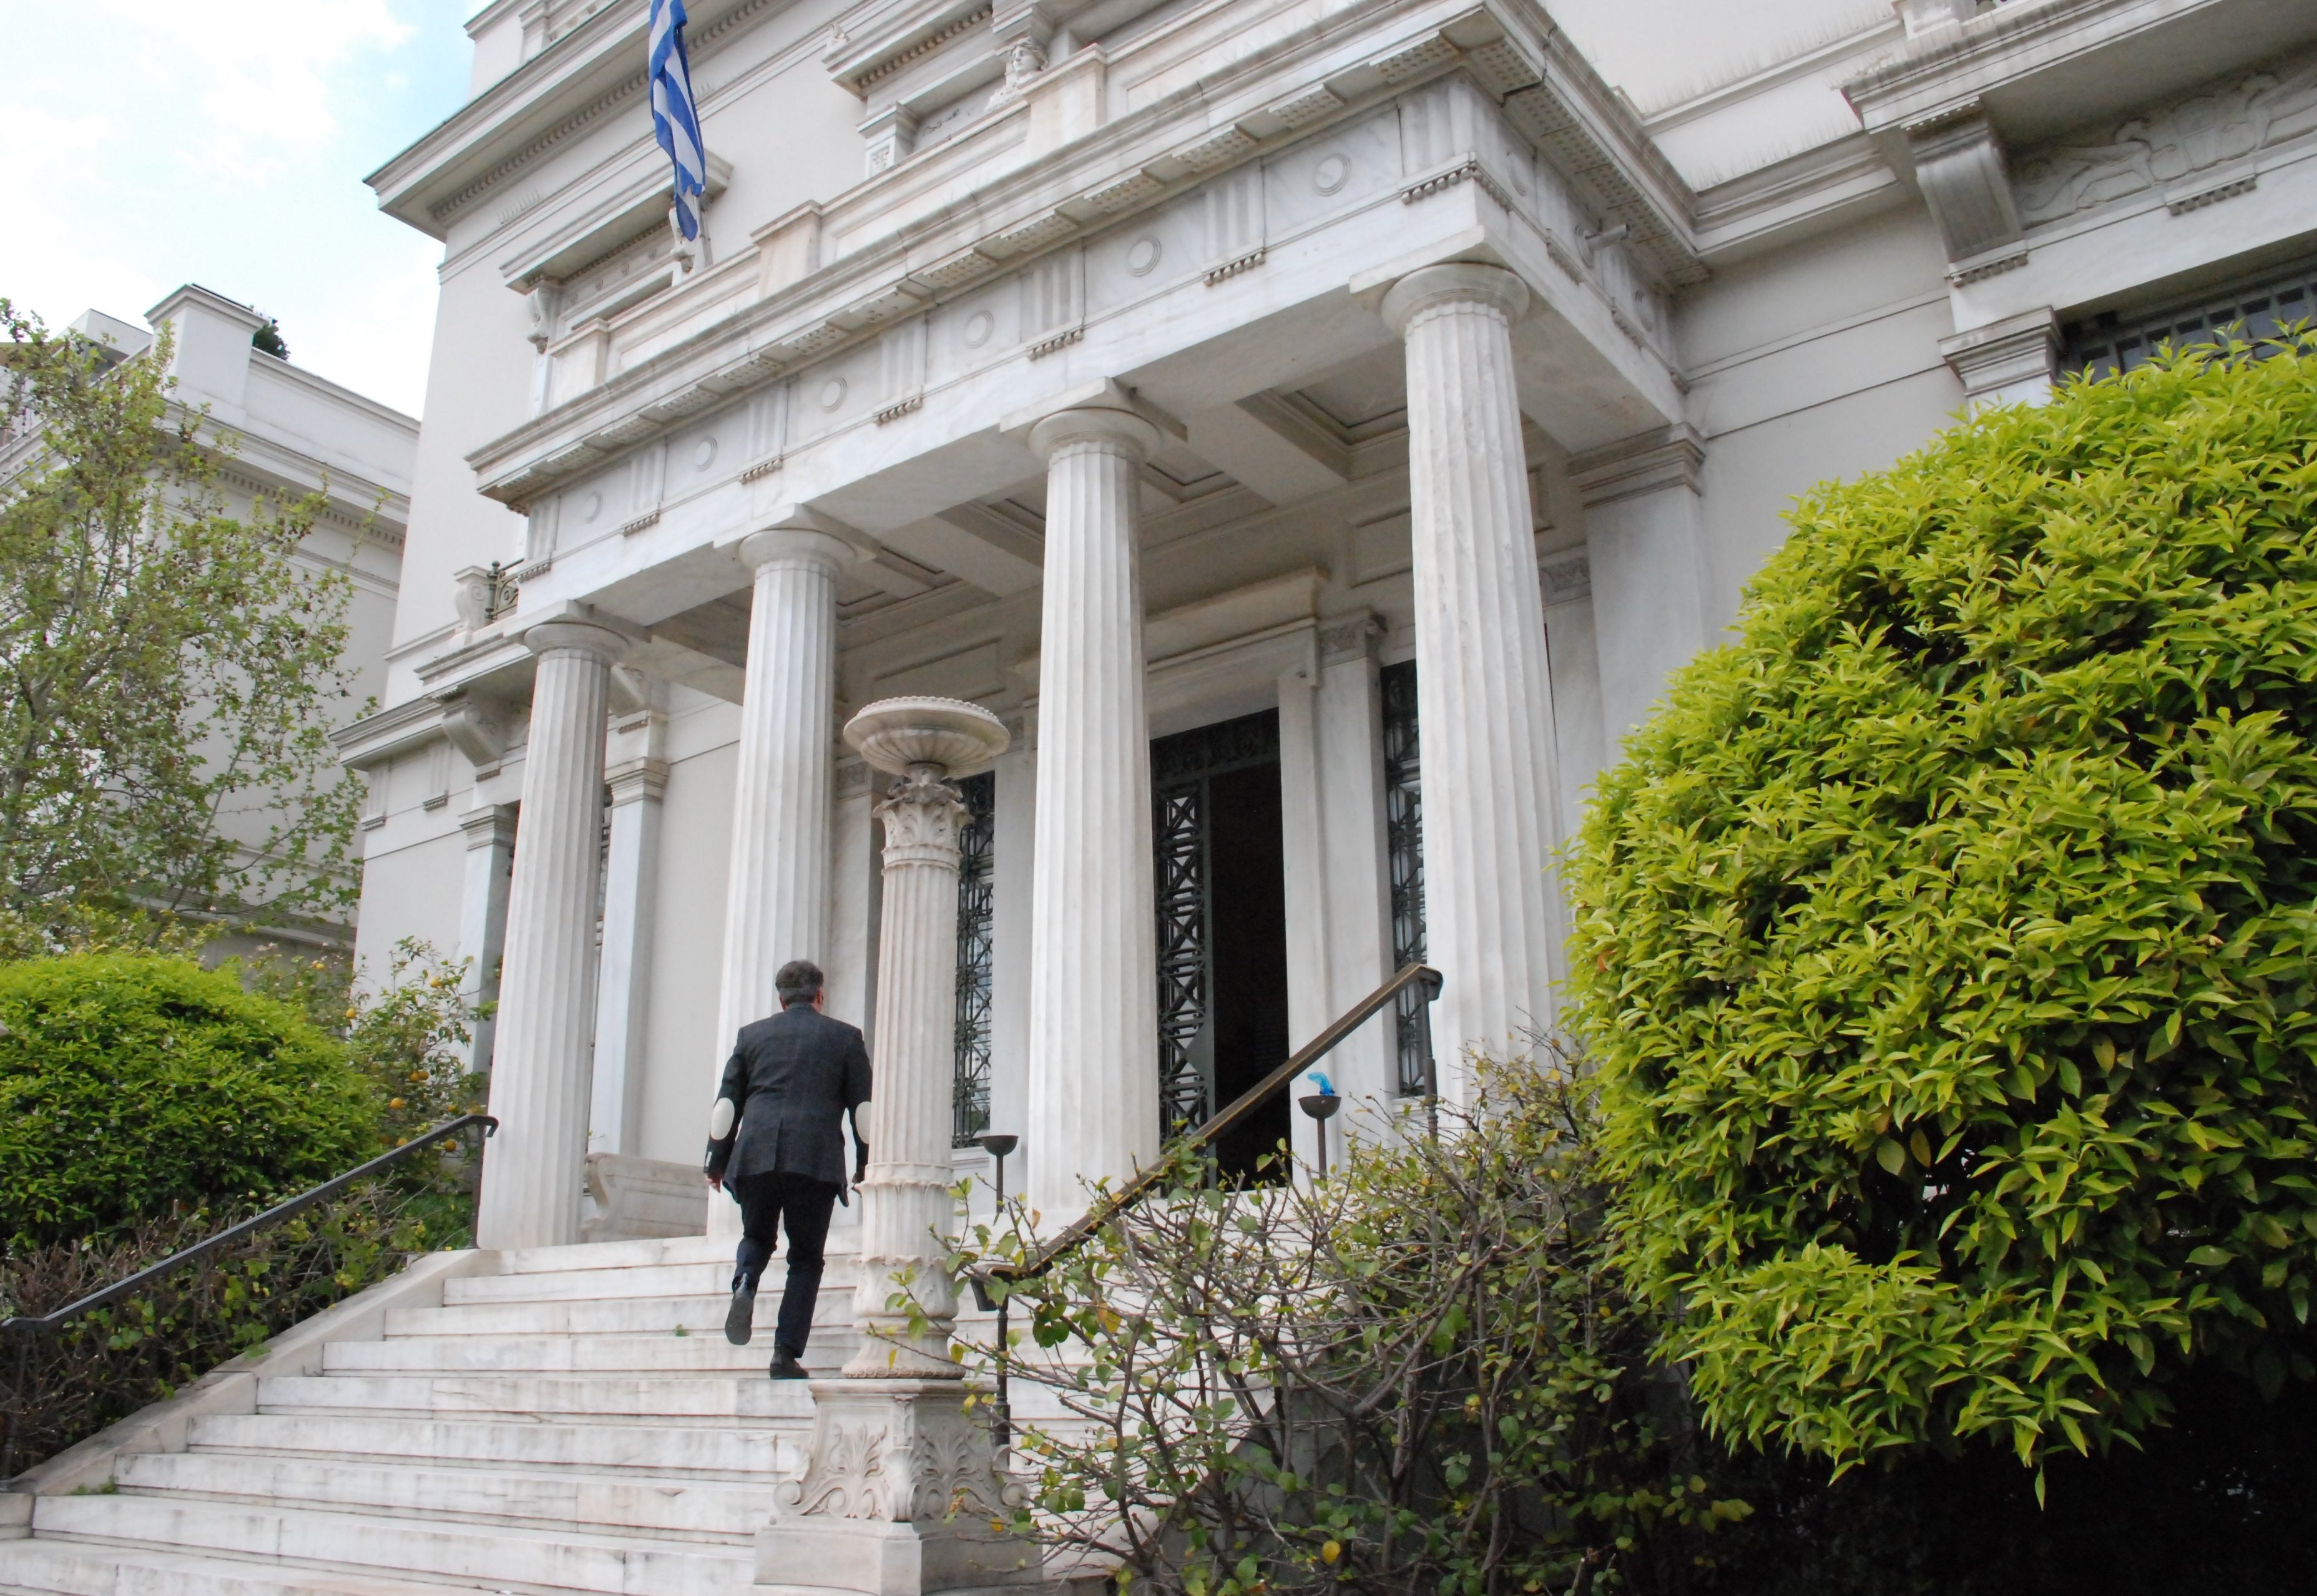 Athens’ Benaki Museum of Greek Culture houses thousands of ancient artefacts that shaped Greece, and is one of the best museums to visit in the city. Photo: Getty Images